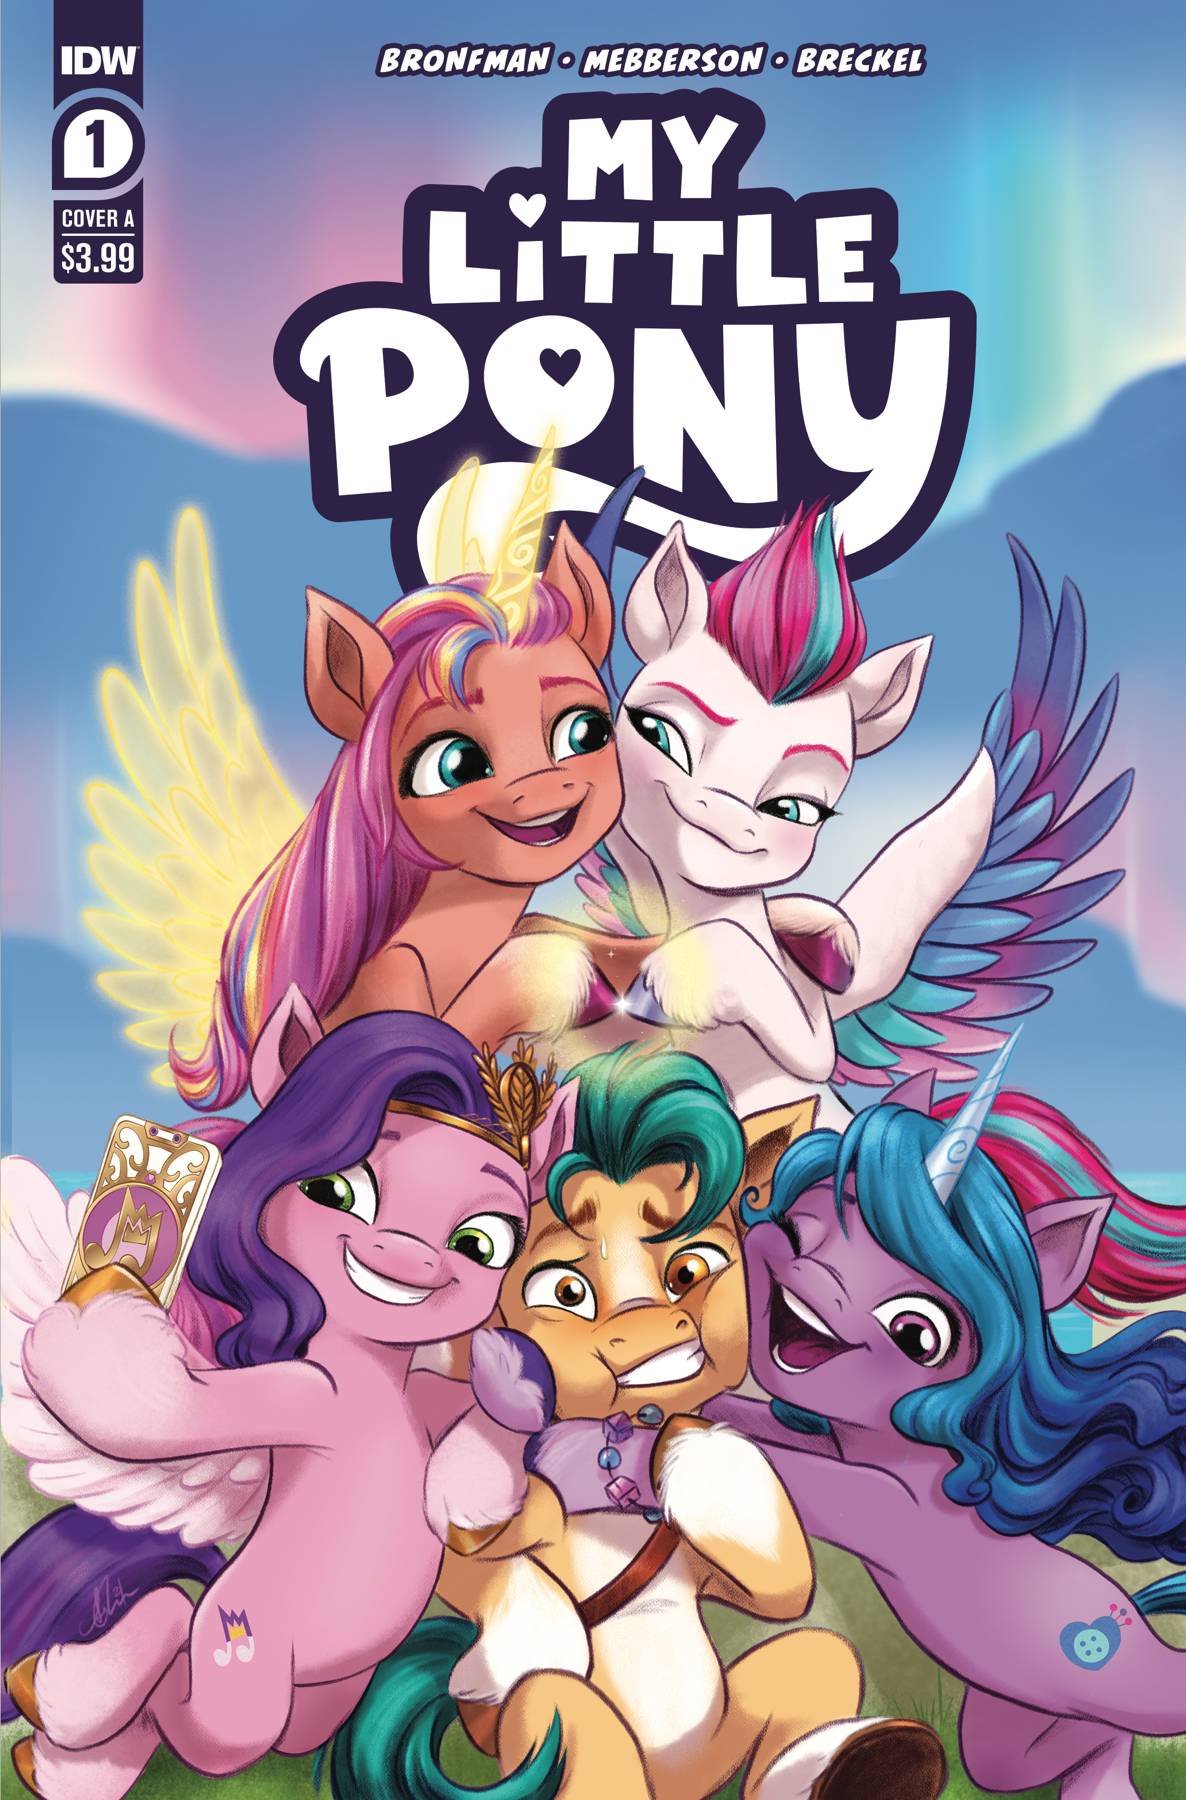 My Little Pony #1 Cover A